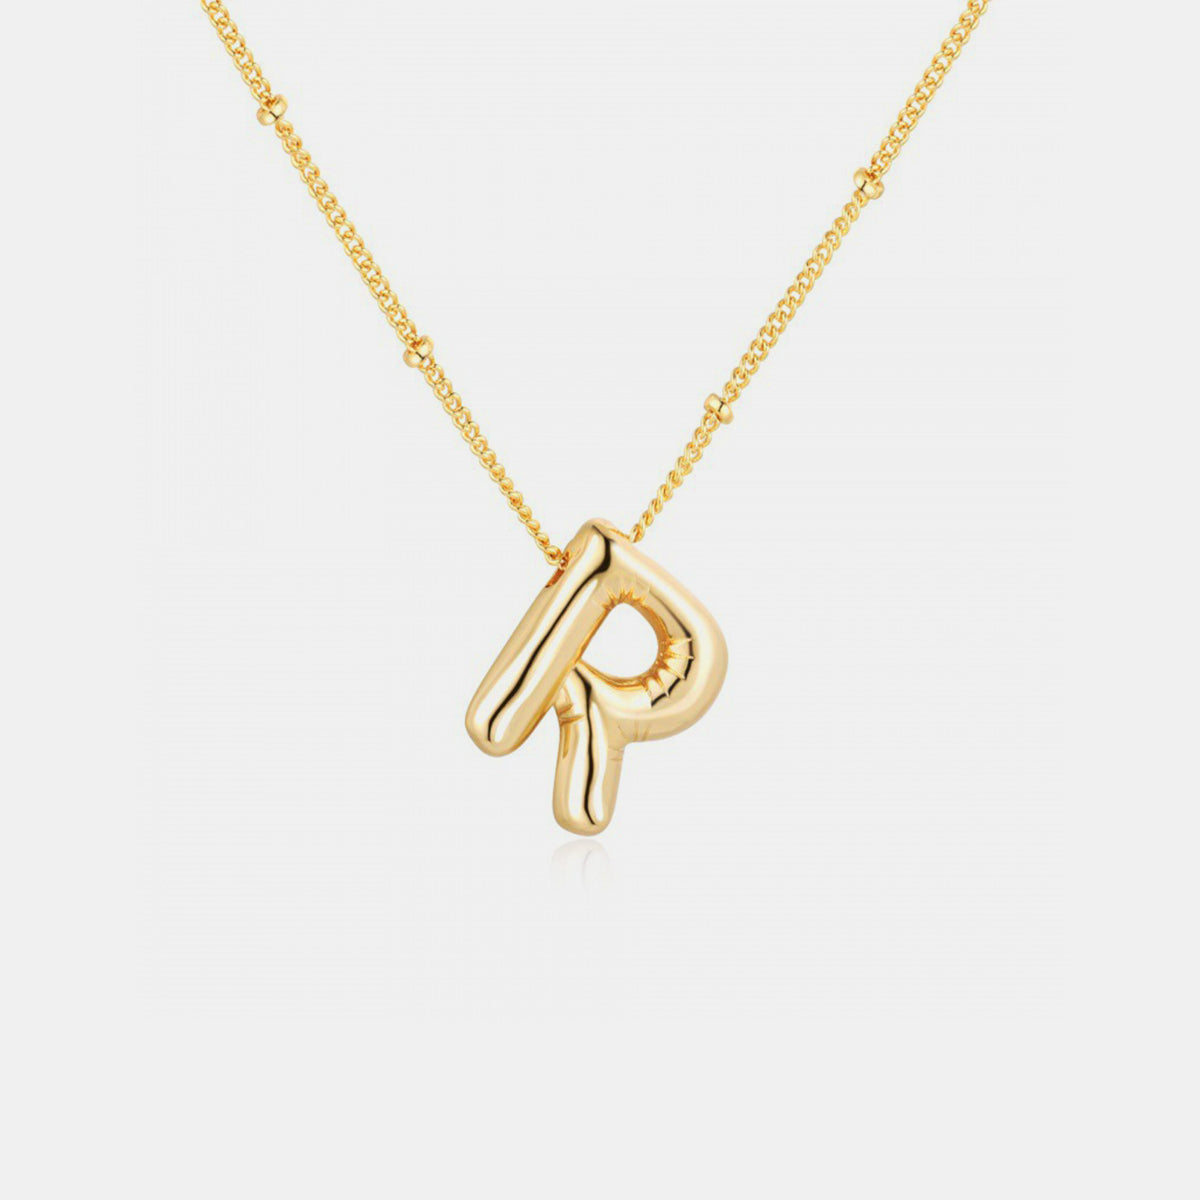 TEEK - K-S Gold-Plated Letter Pendant Necklace JEWELRY TEEK Trend Style R  